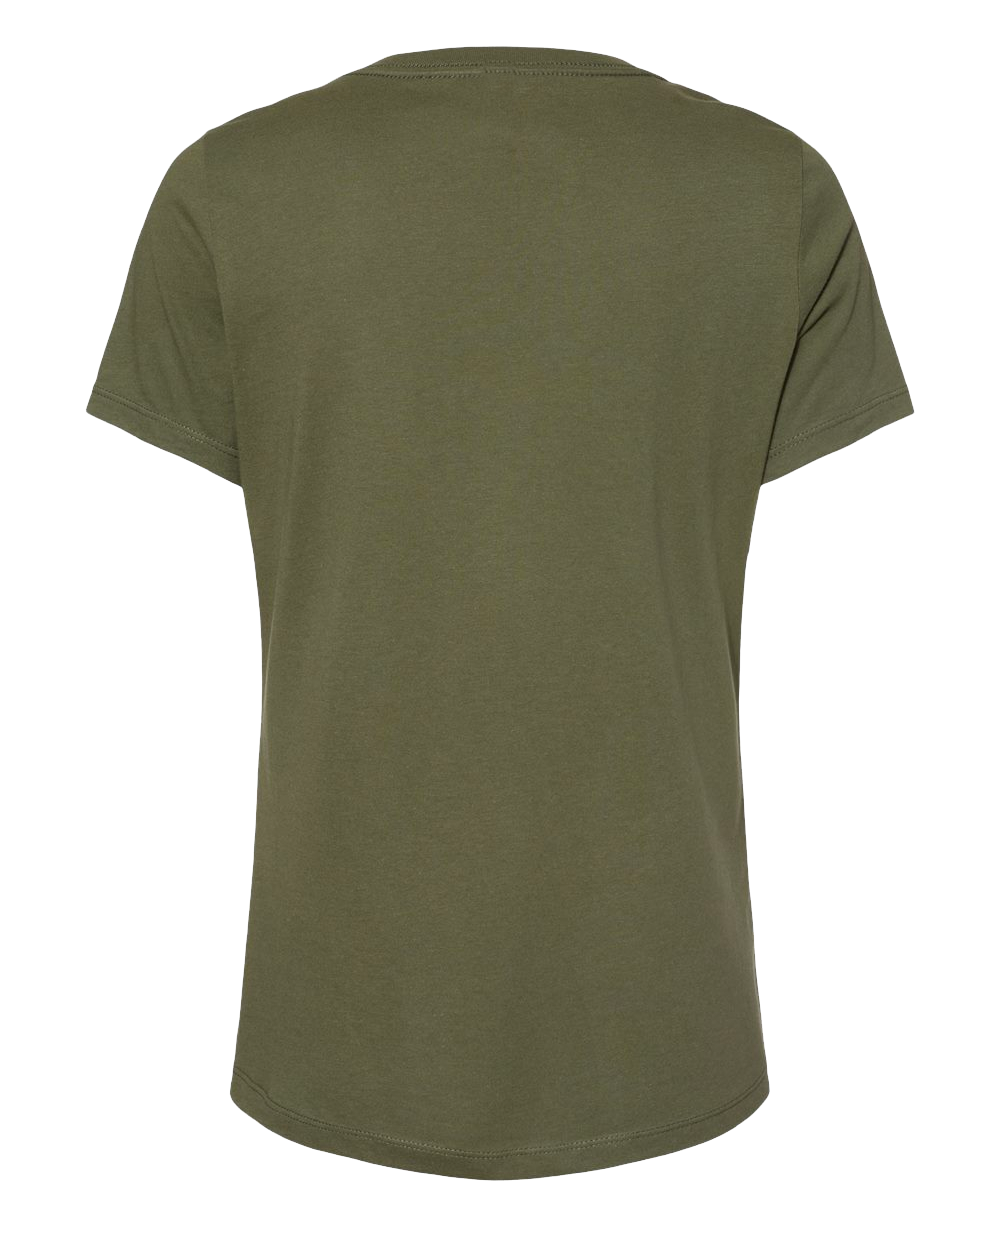 COWGIRL WOMEN'S V-NECK - MILITARY GREEN